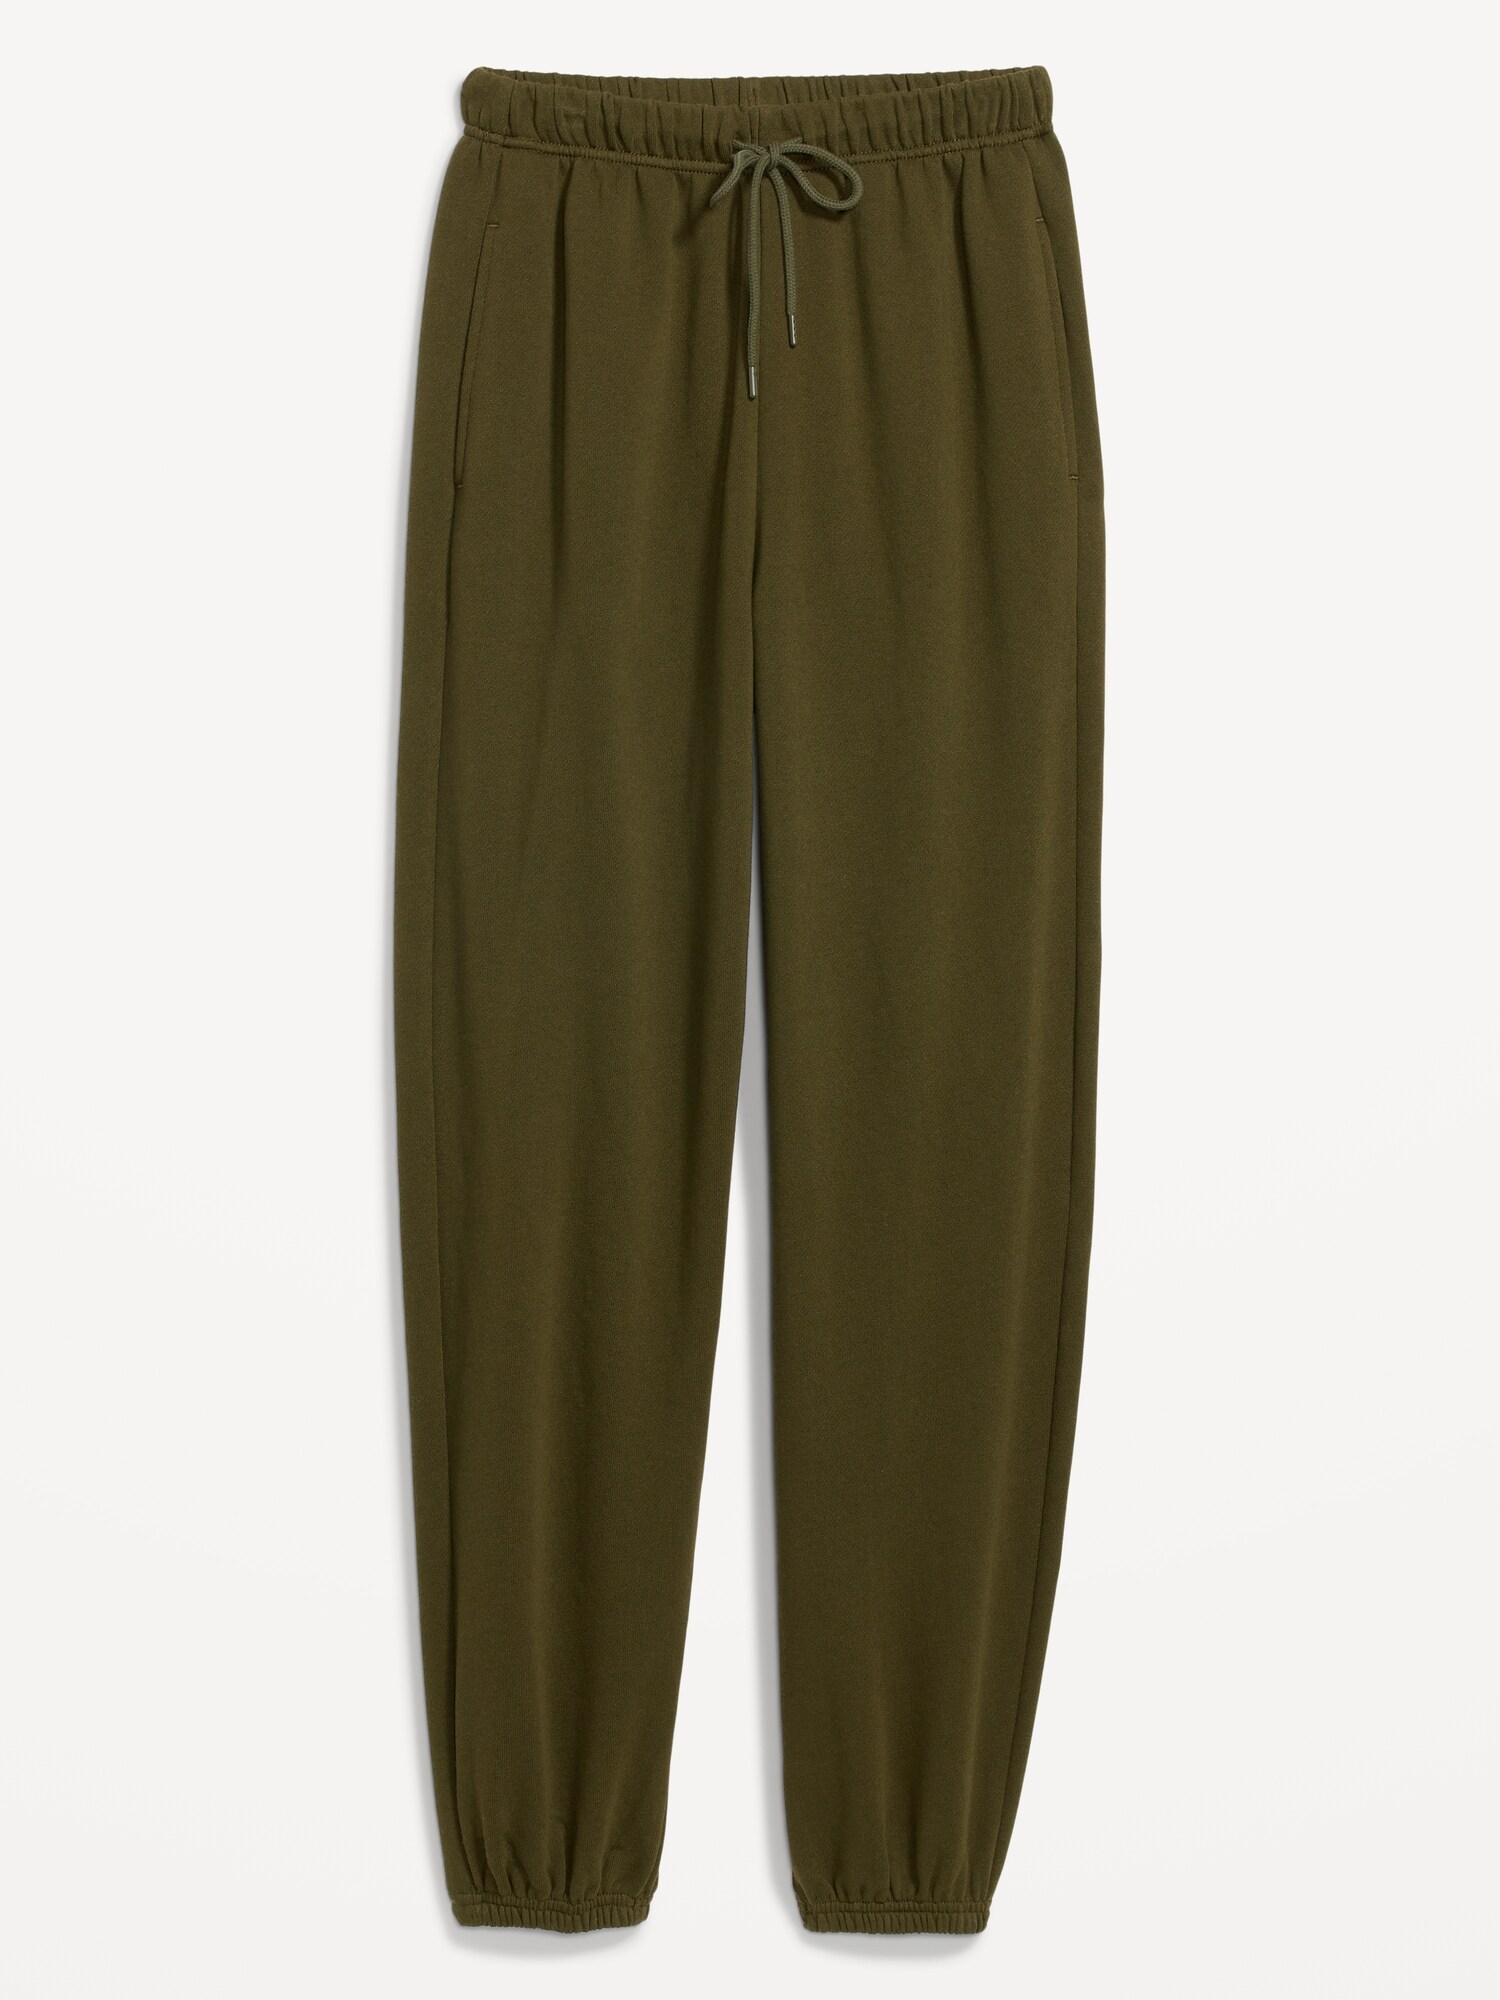 Extra High-Waisted Jogger Sweatpants, Old Navy